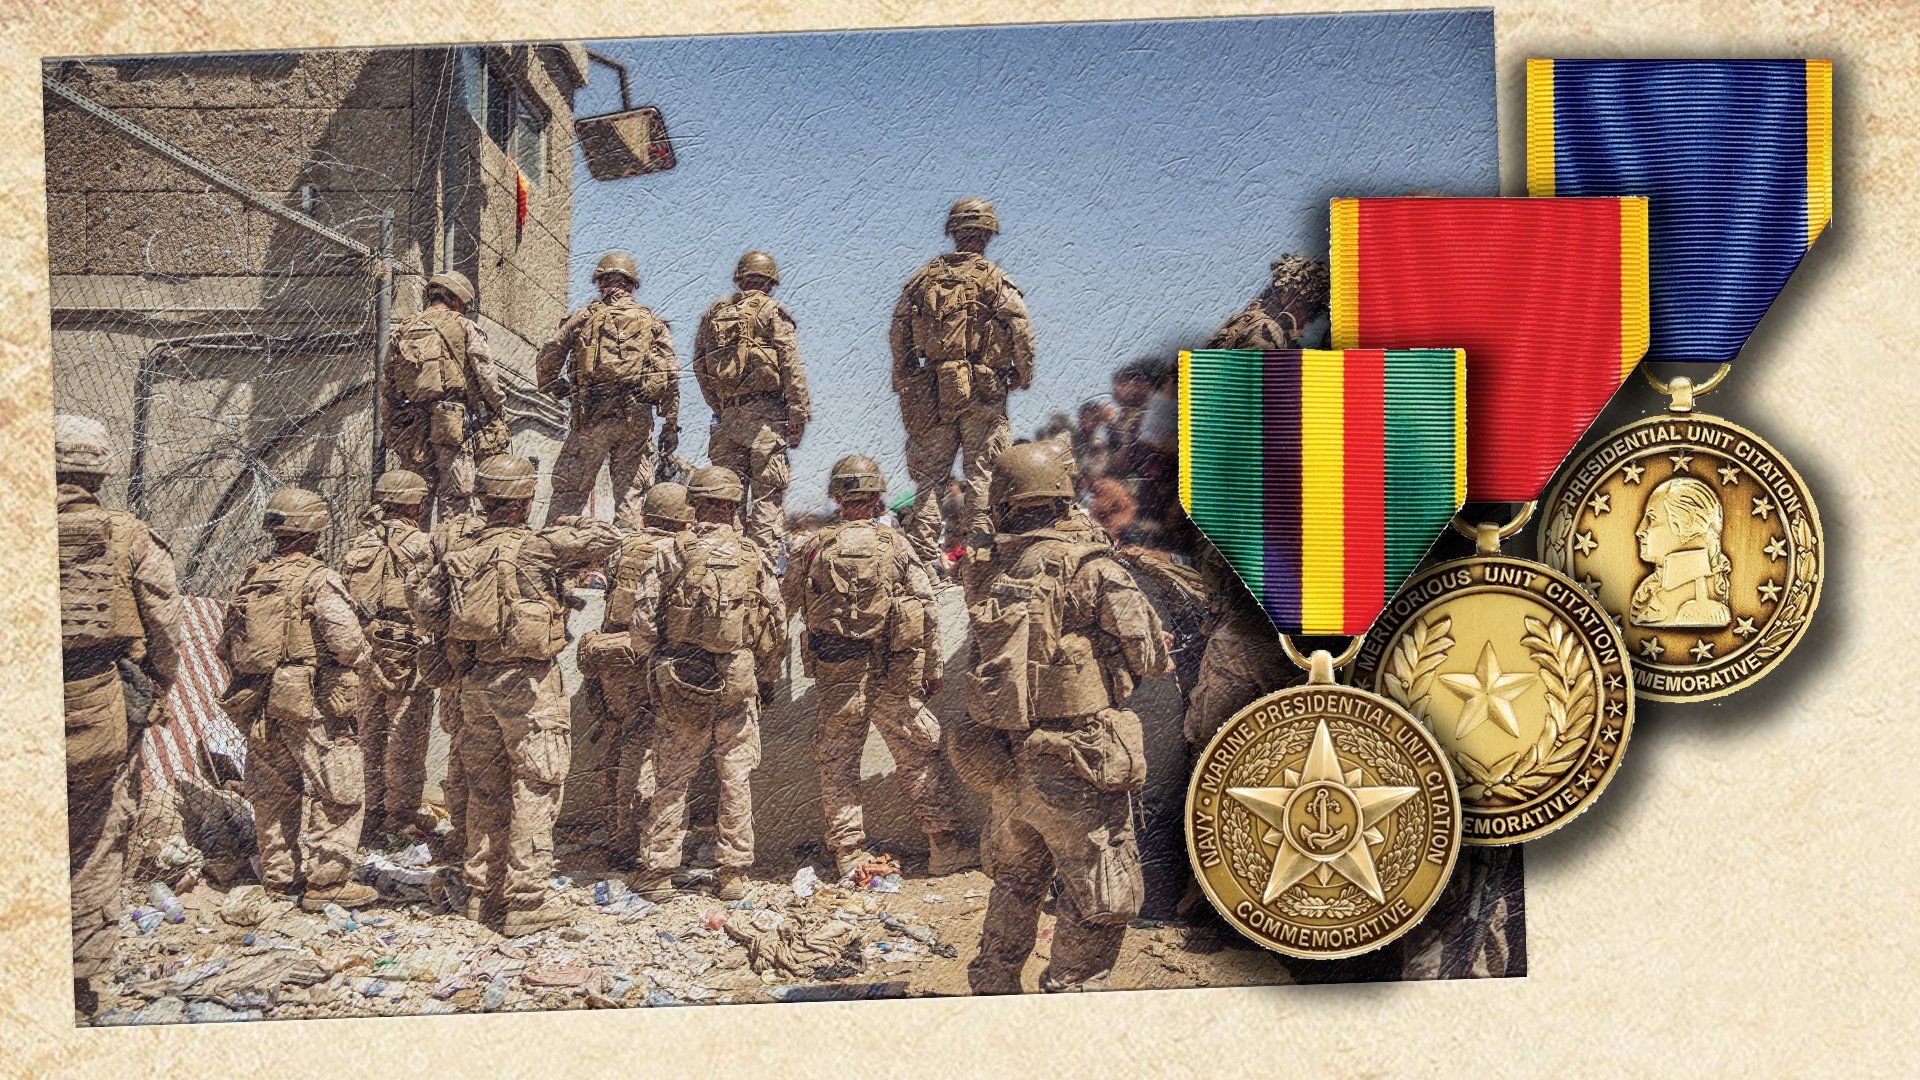 Troops in units who participated in the withdraw from Afghanistan are now eligible for the Meriorious Unit Citation. Units that were at Kabul's airport during the final withdraw will be considered for the Presidential Unit Citation, the highest award the military confers for combat operations to a unit.